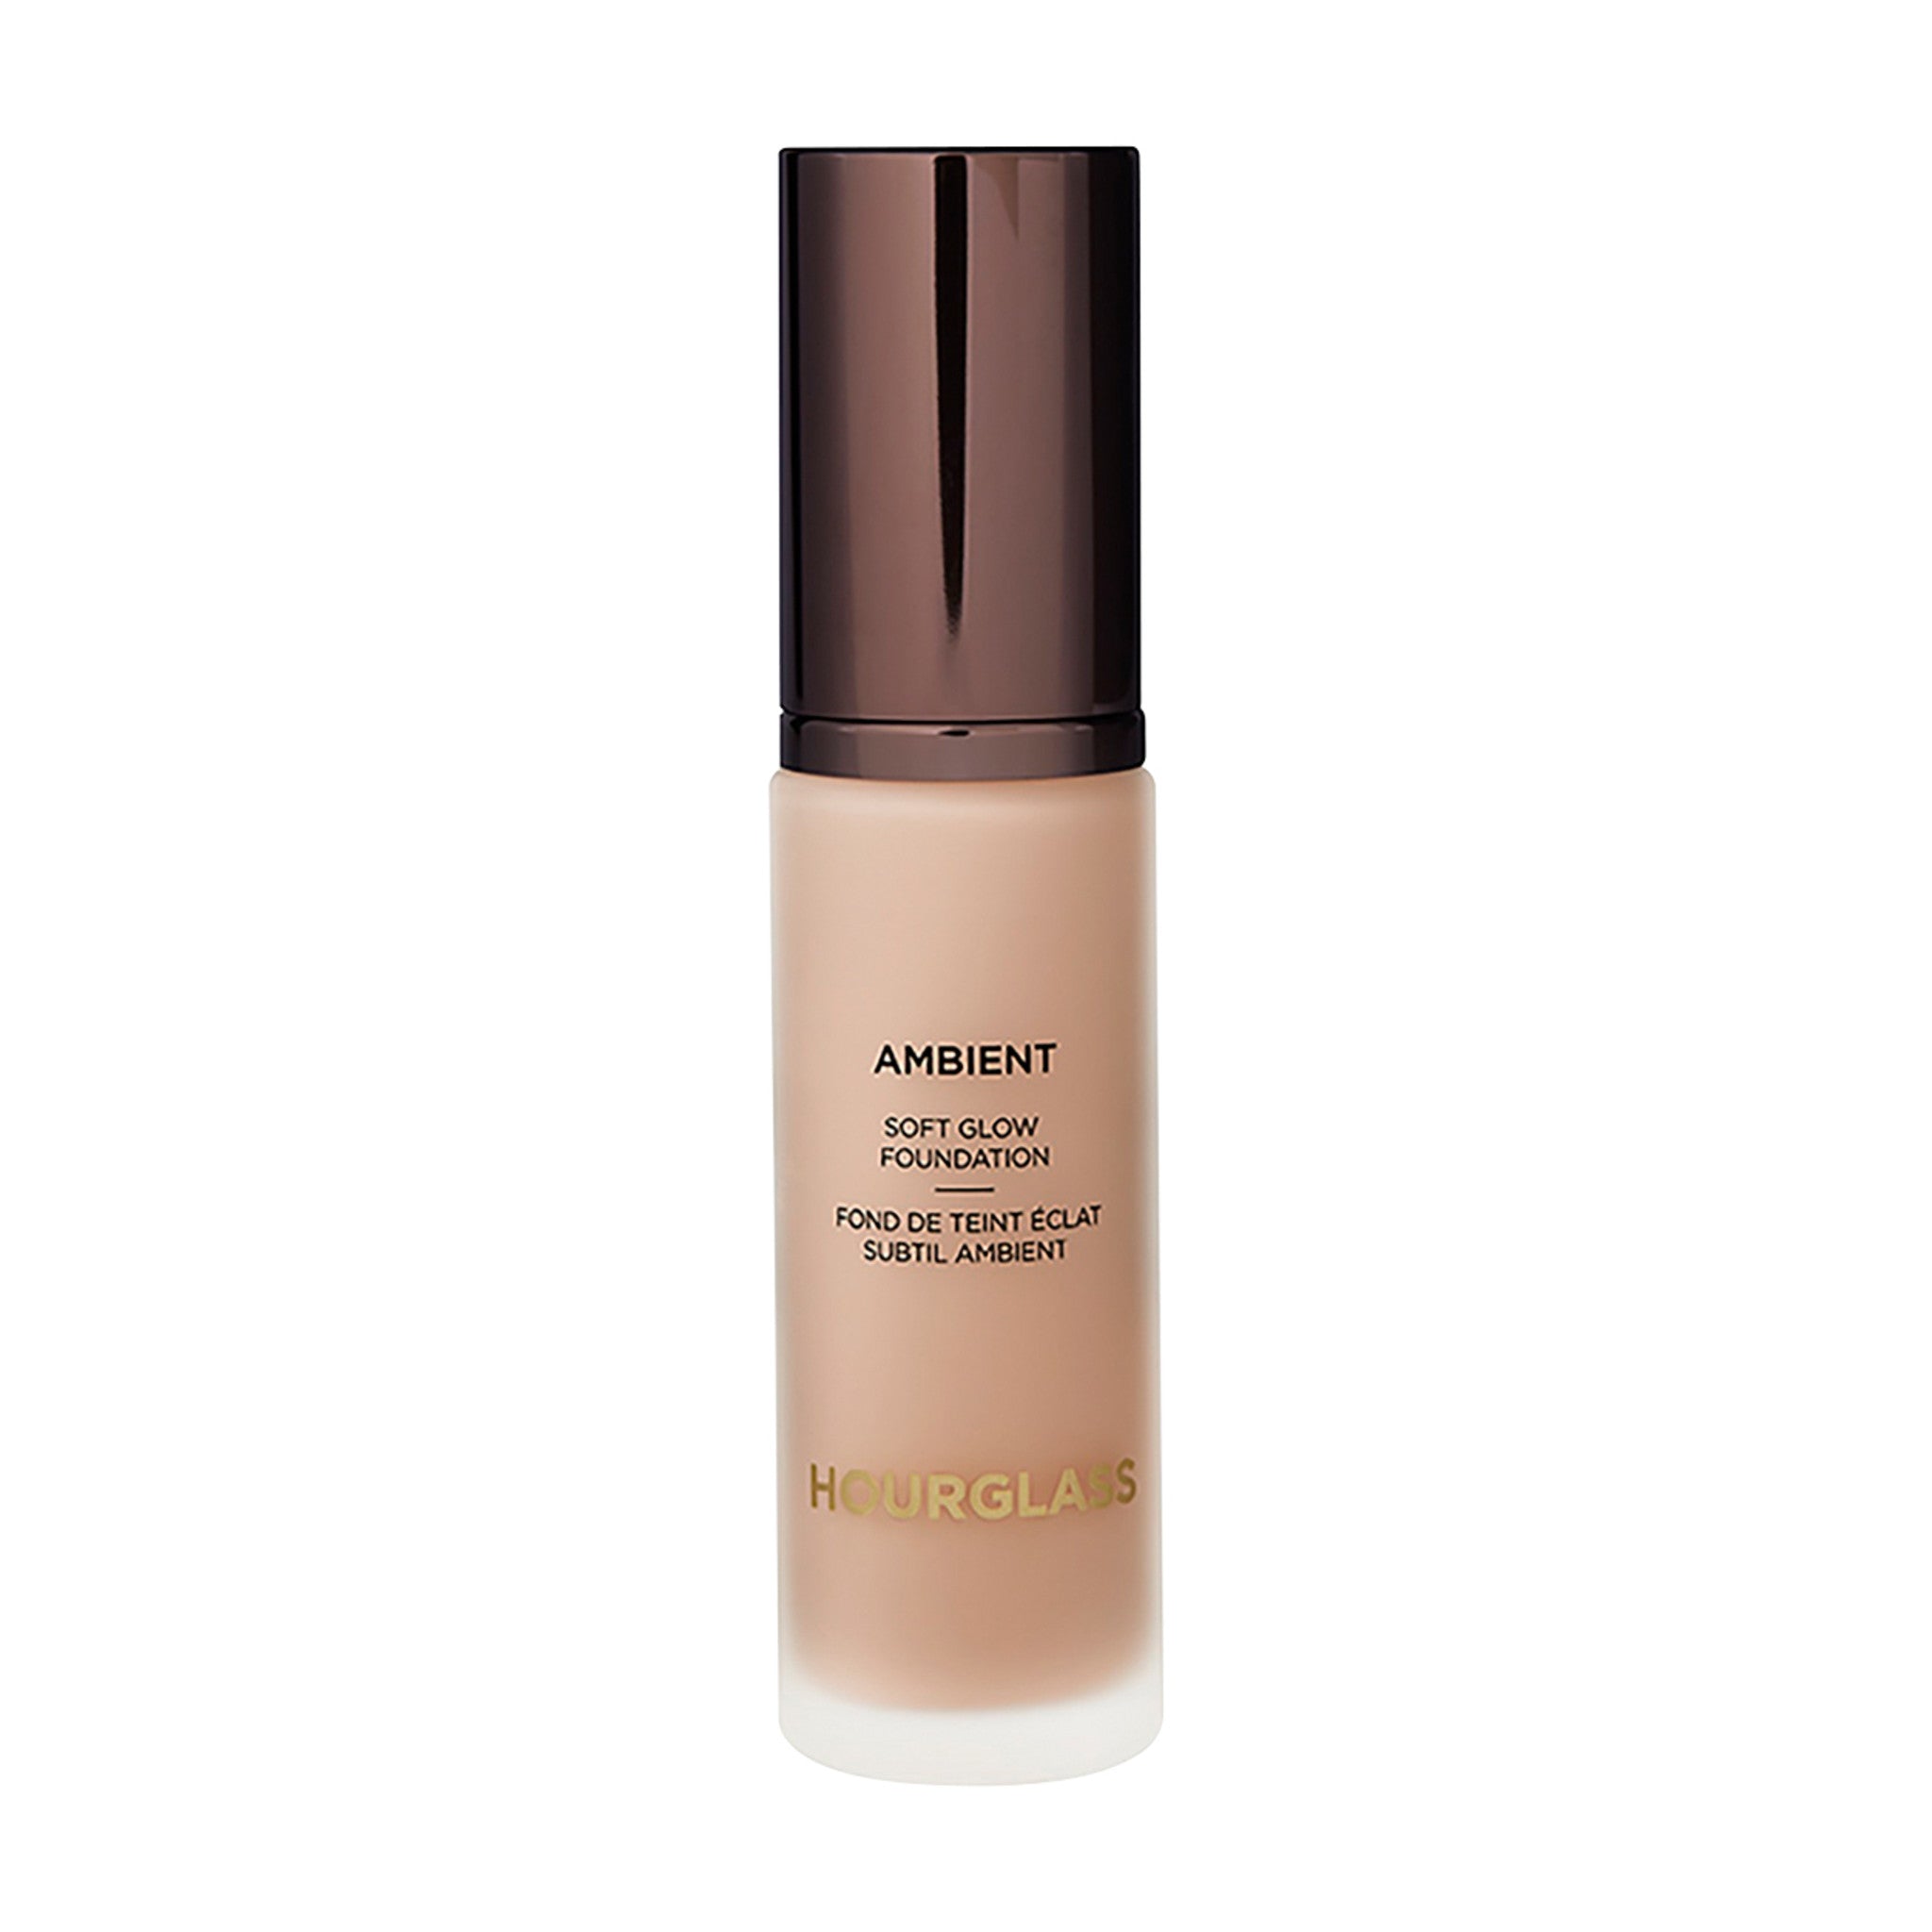 Ambient Soft Glow Foundation main image.